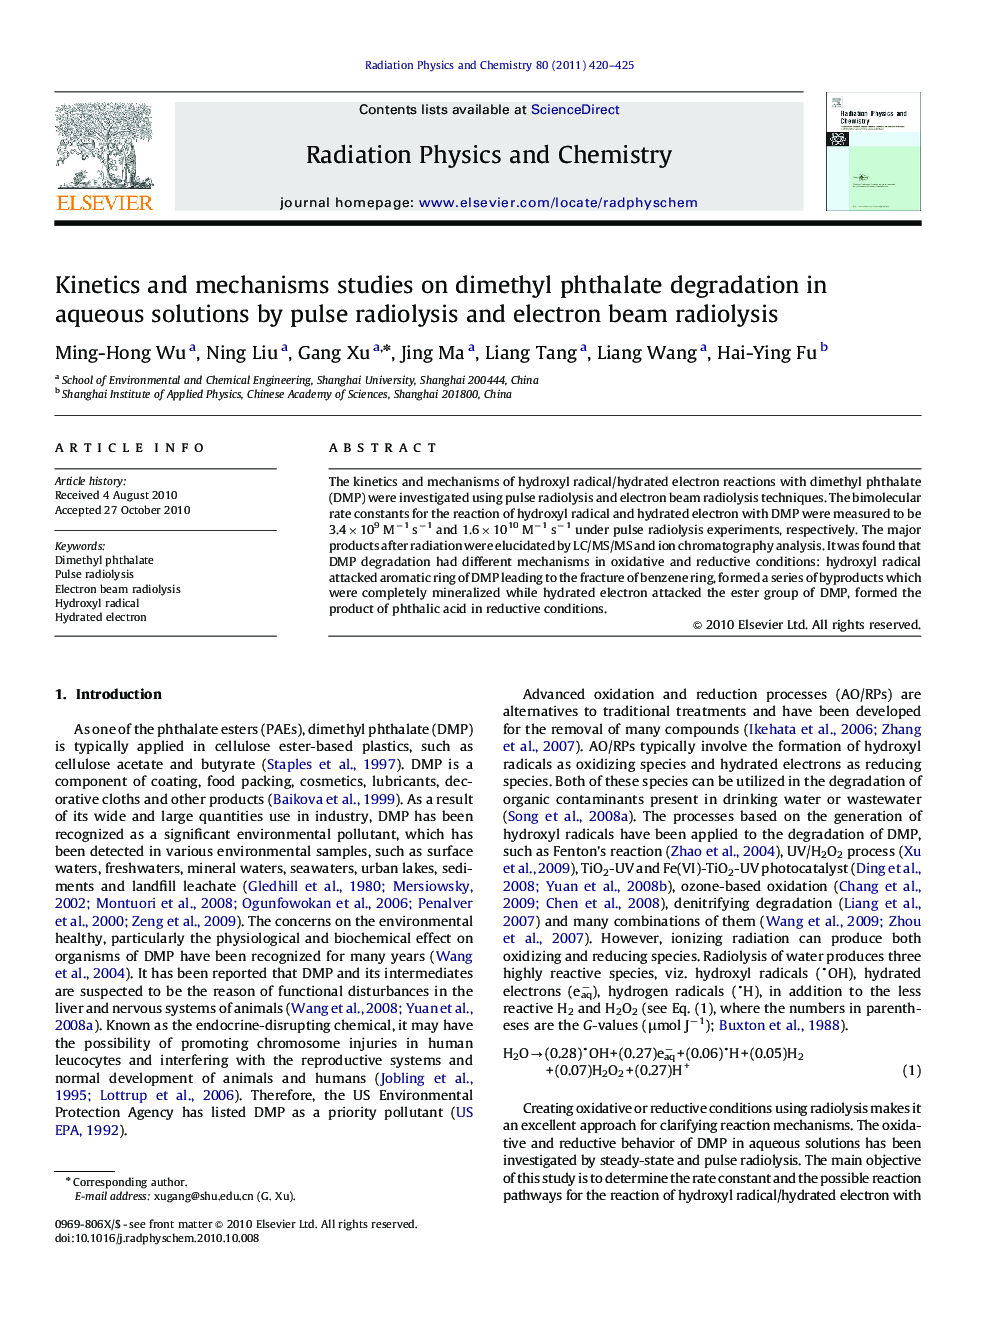 Kinetics and mechanisms studies on dimethyl phthalate degradation in aqueous solutions by pulse radiolysis and electron beam radiolysis